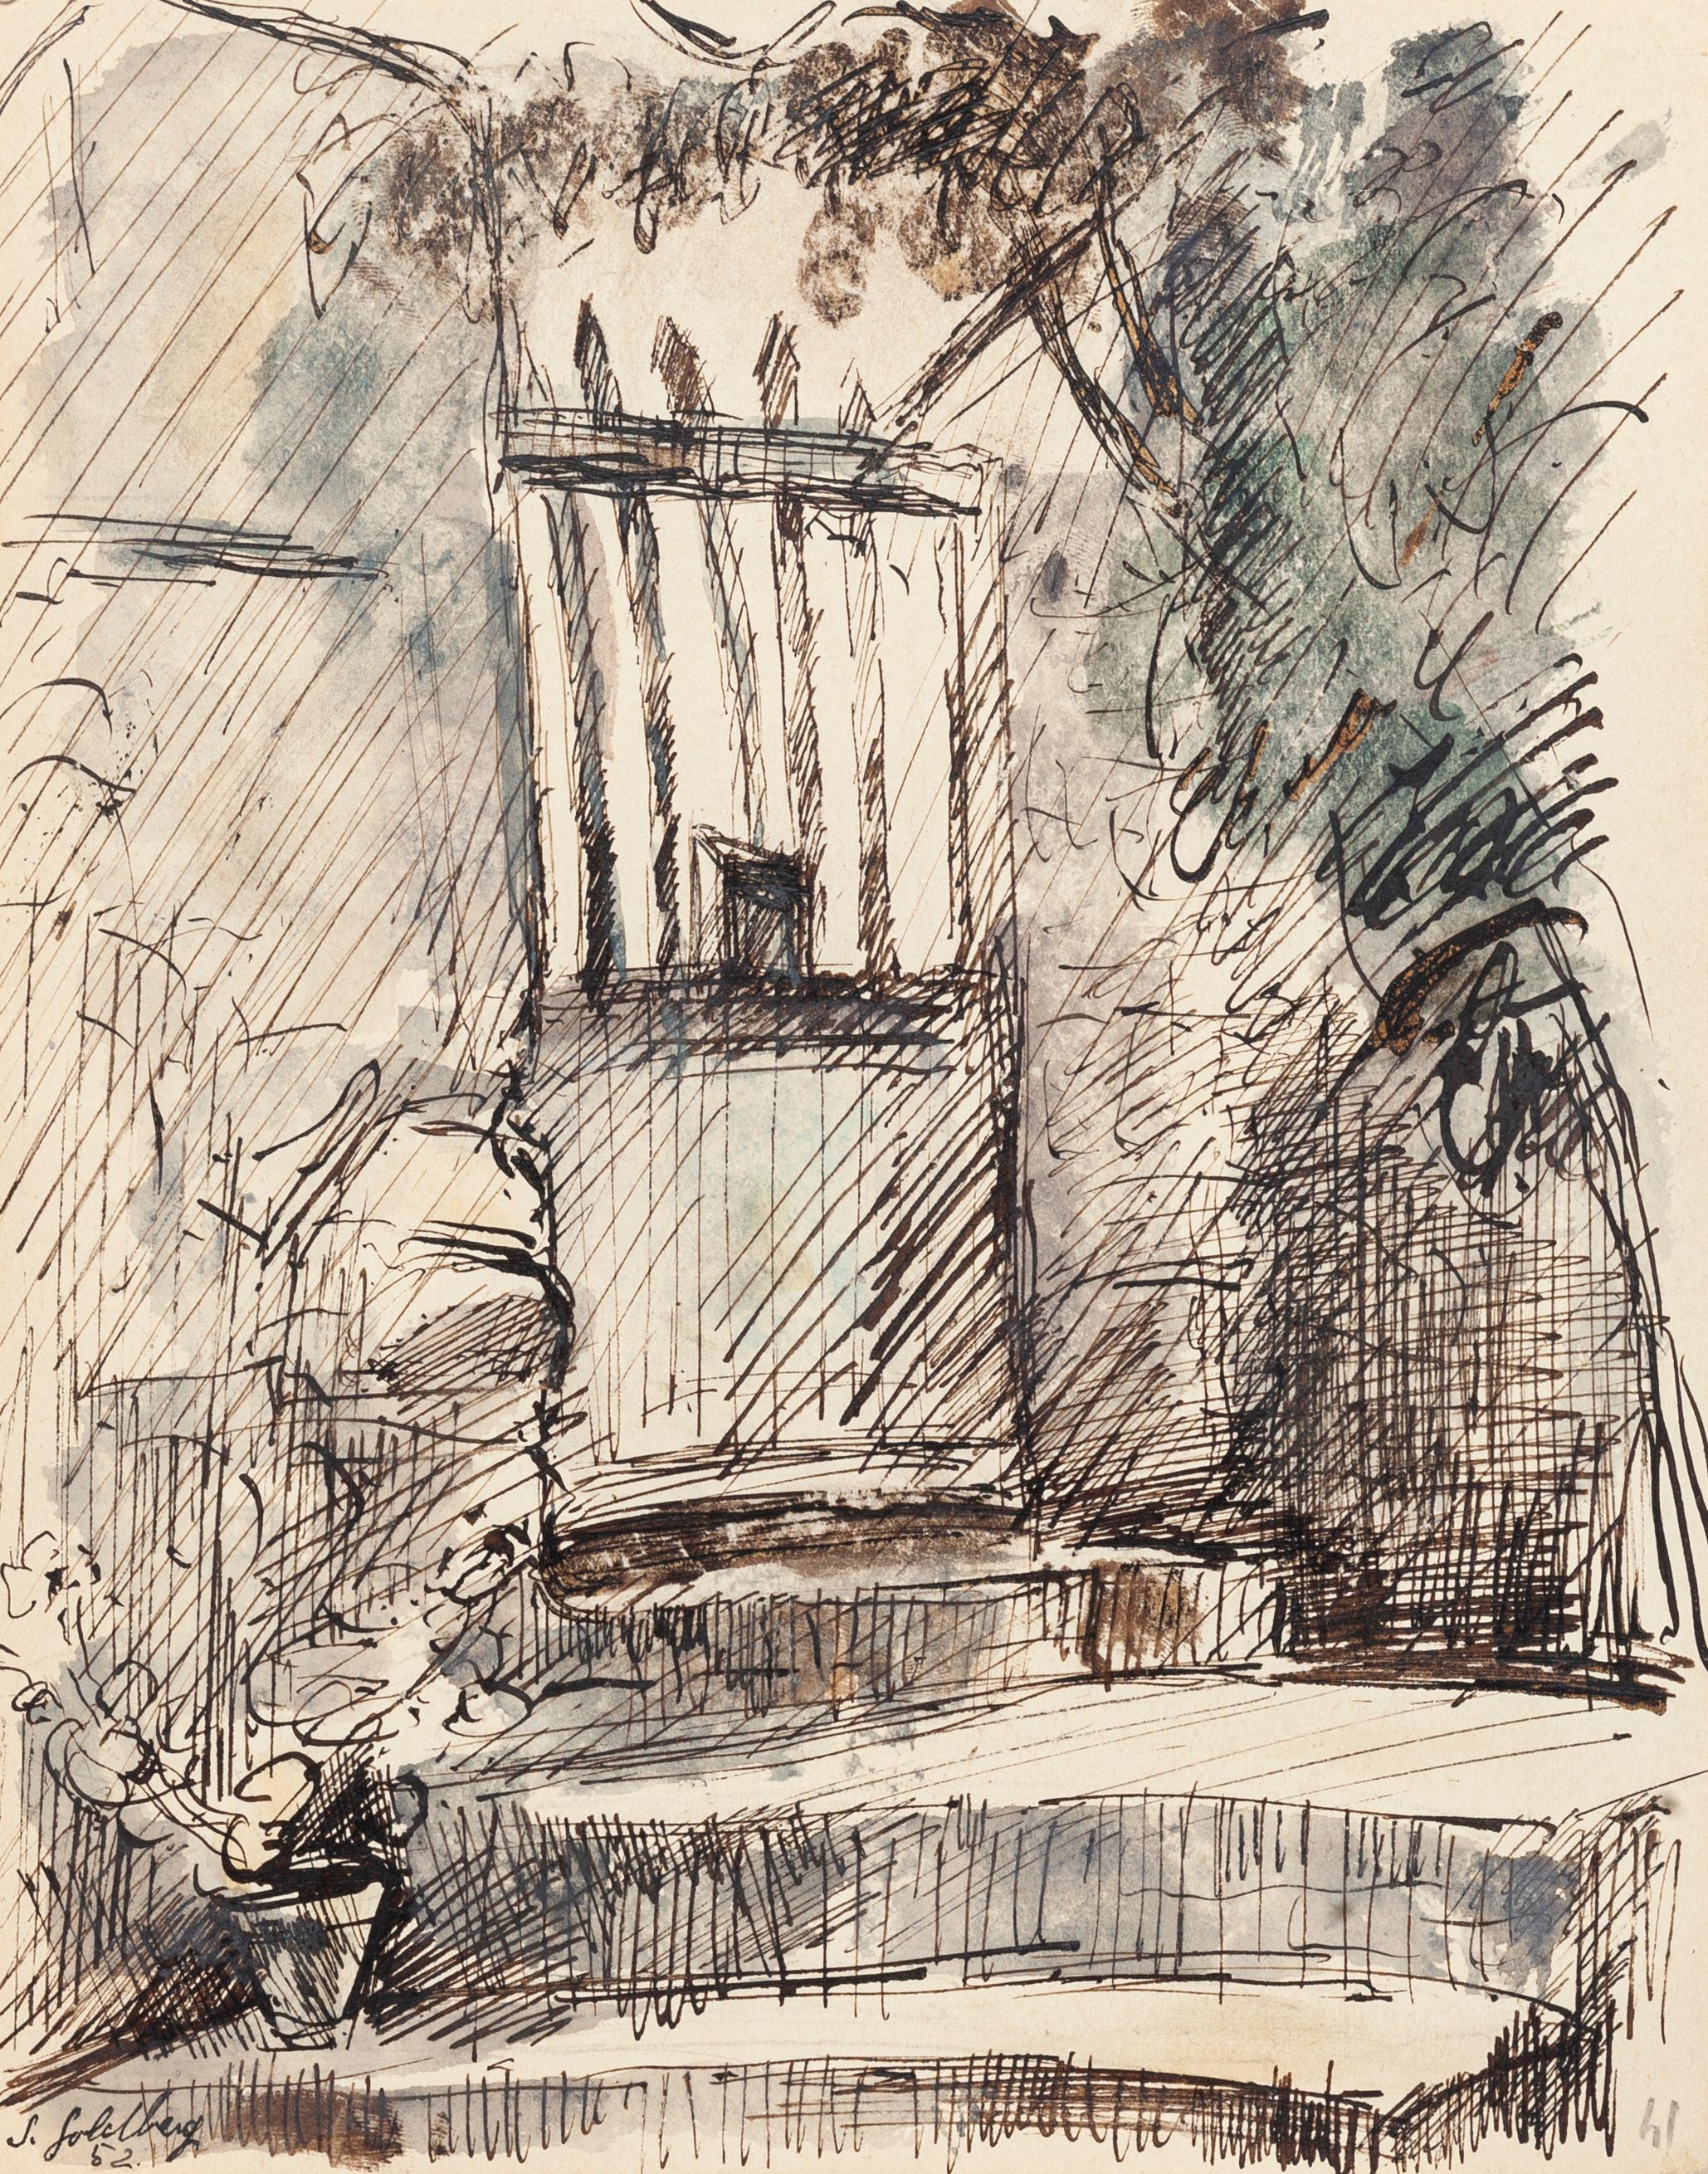 Entry - Original Ink and Watercolor by S. Goldberg - 1952